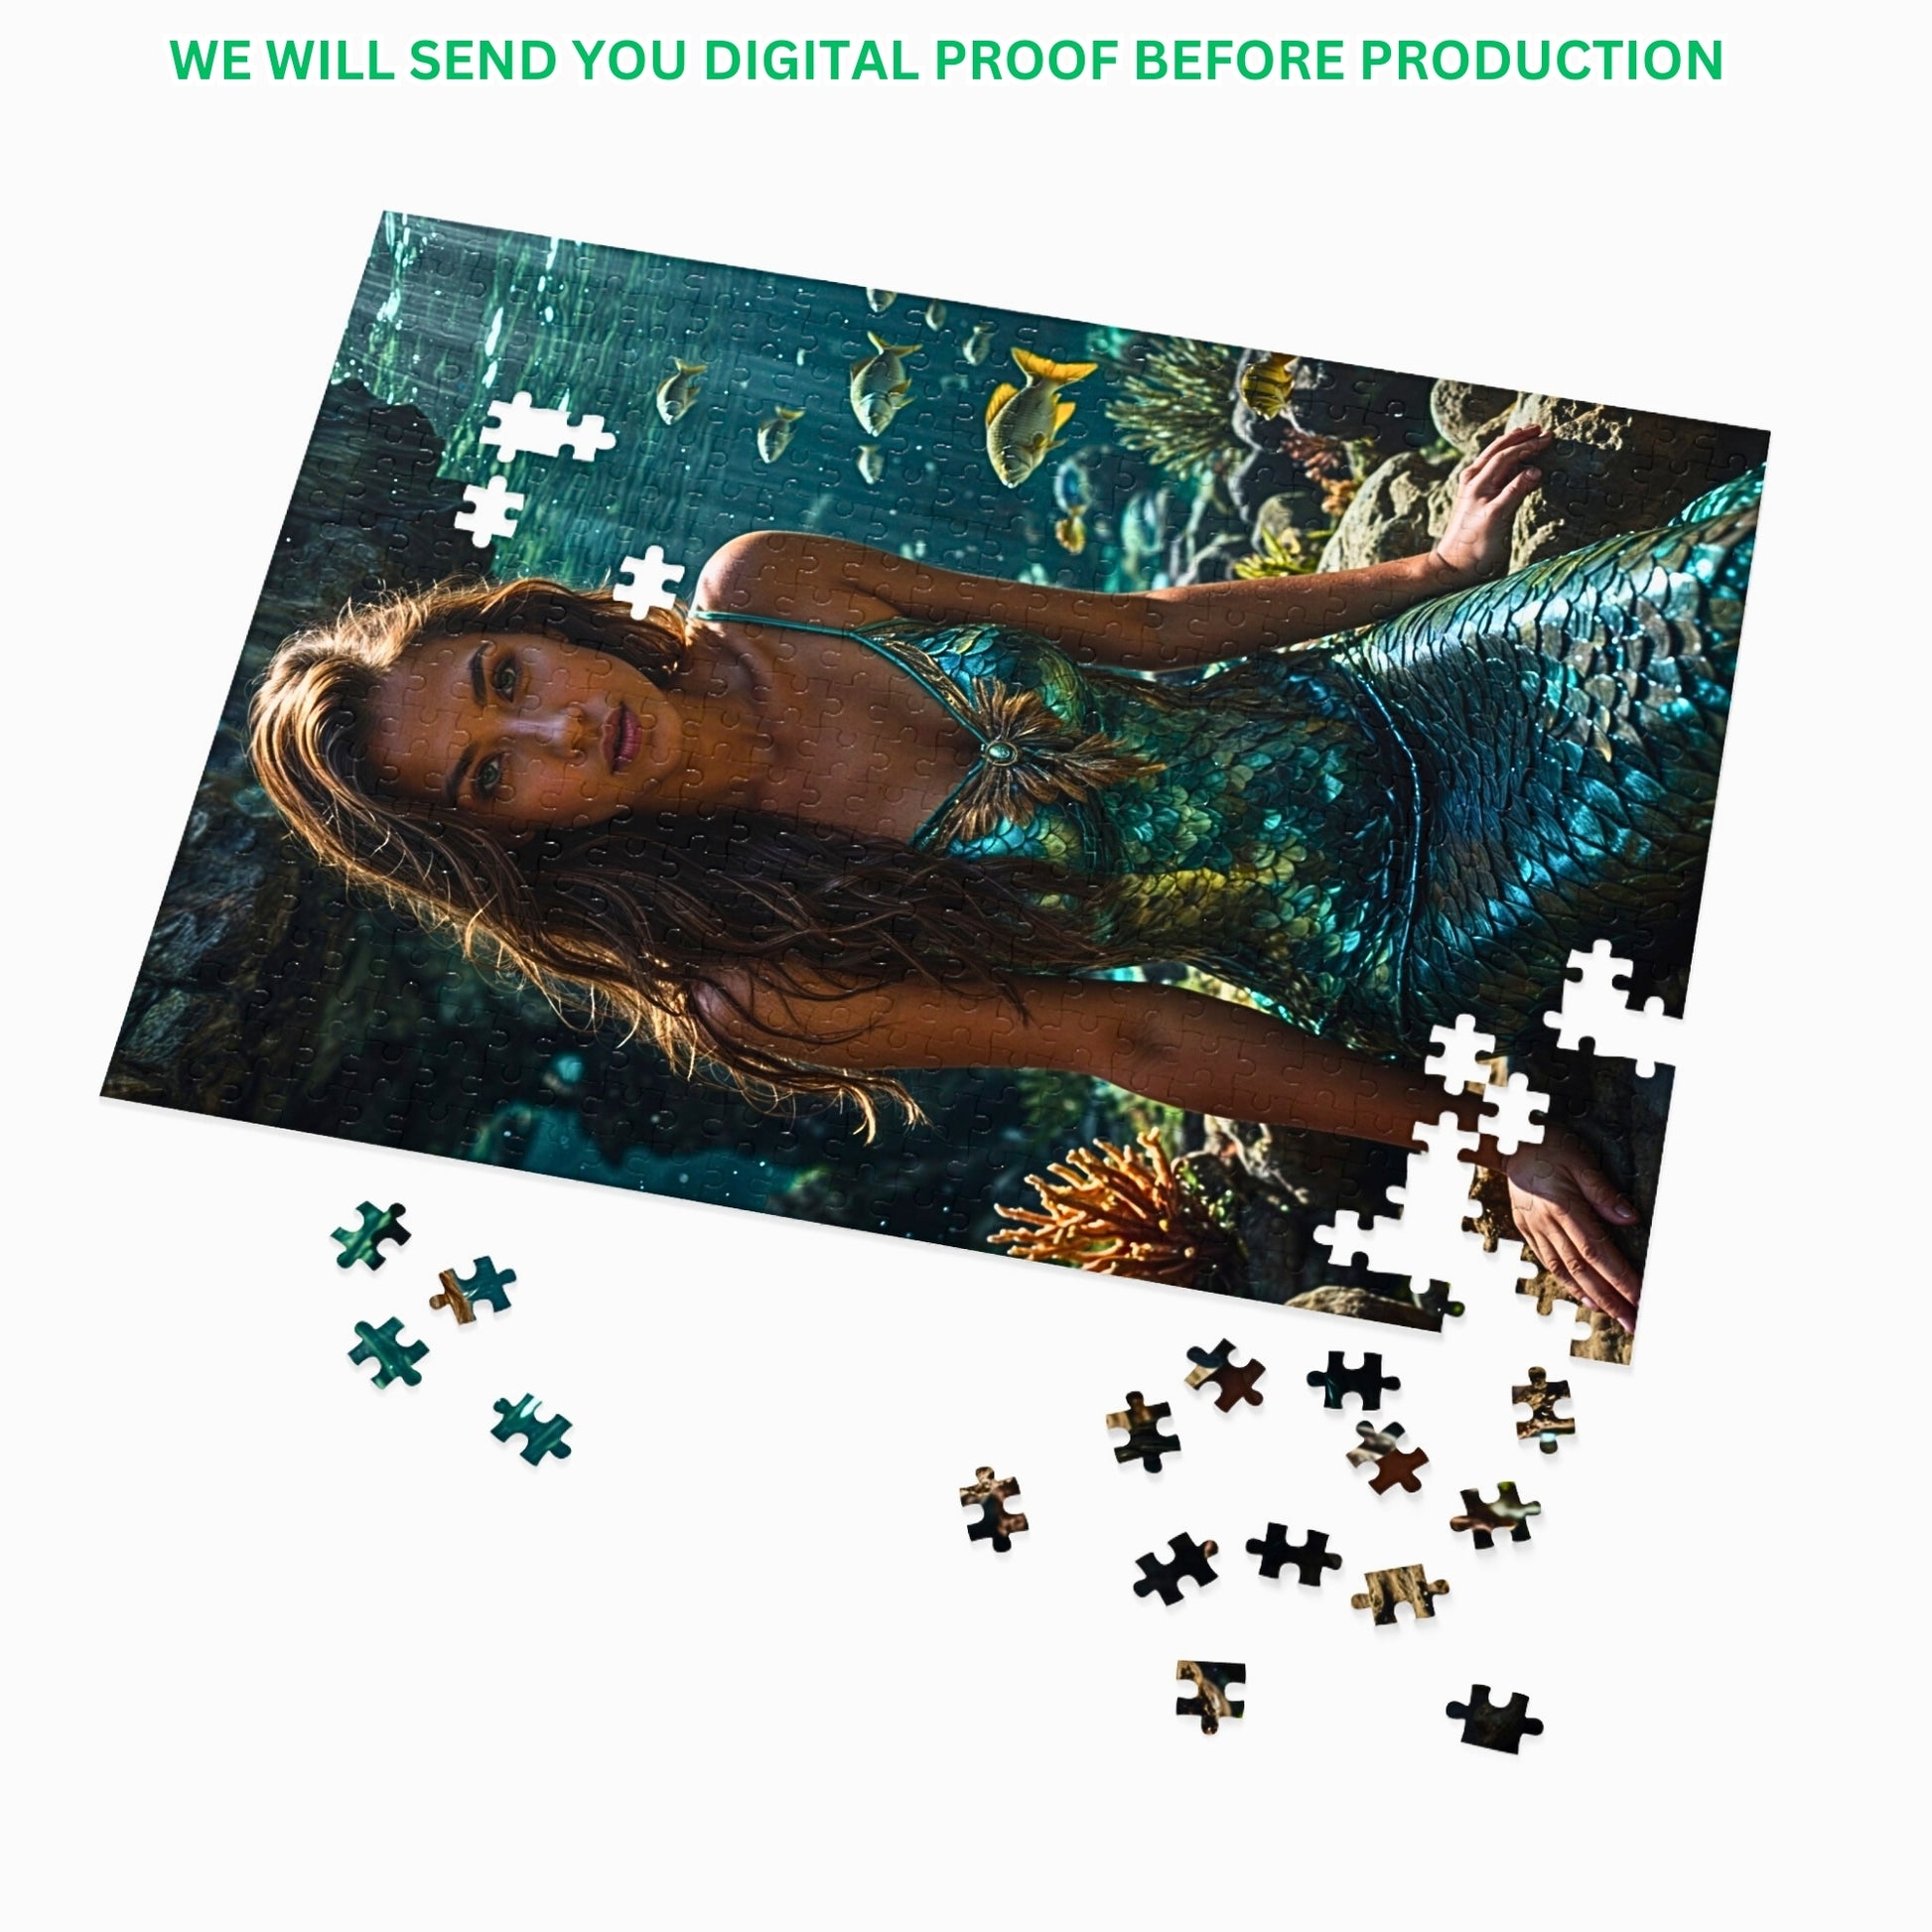 Turn your photo into a personalized mermaid puzzle! Customize a princess portrait for a special birthday gift. Available in 250 to 1000 pieces. Lady mermaid gifts, princess gifts, and mermaid photo gifts are options. Transform any image into a unique mermaid art puzzle. Perfect for mermaid and princess enthusiasts. Order your custom puzzle creation today!